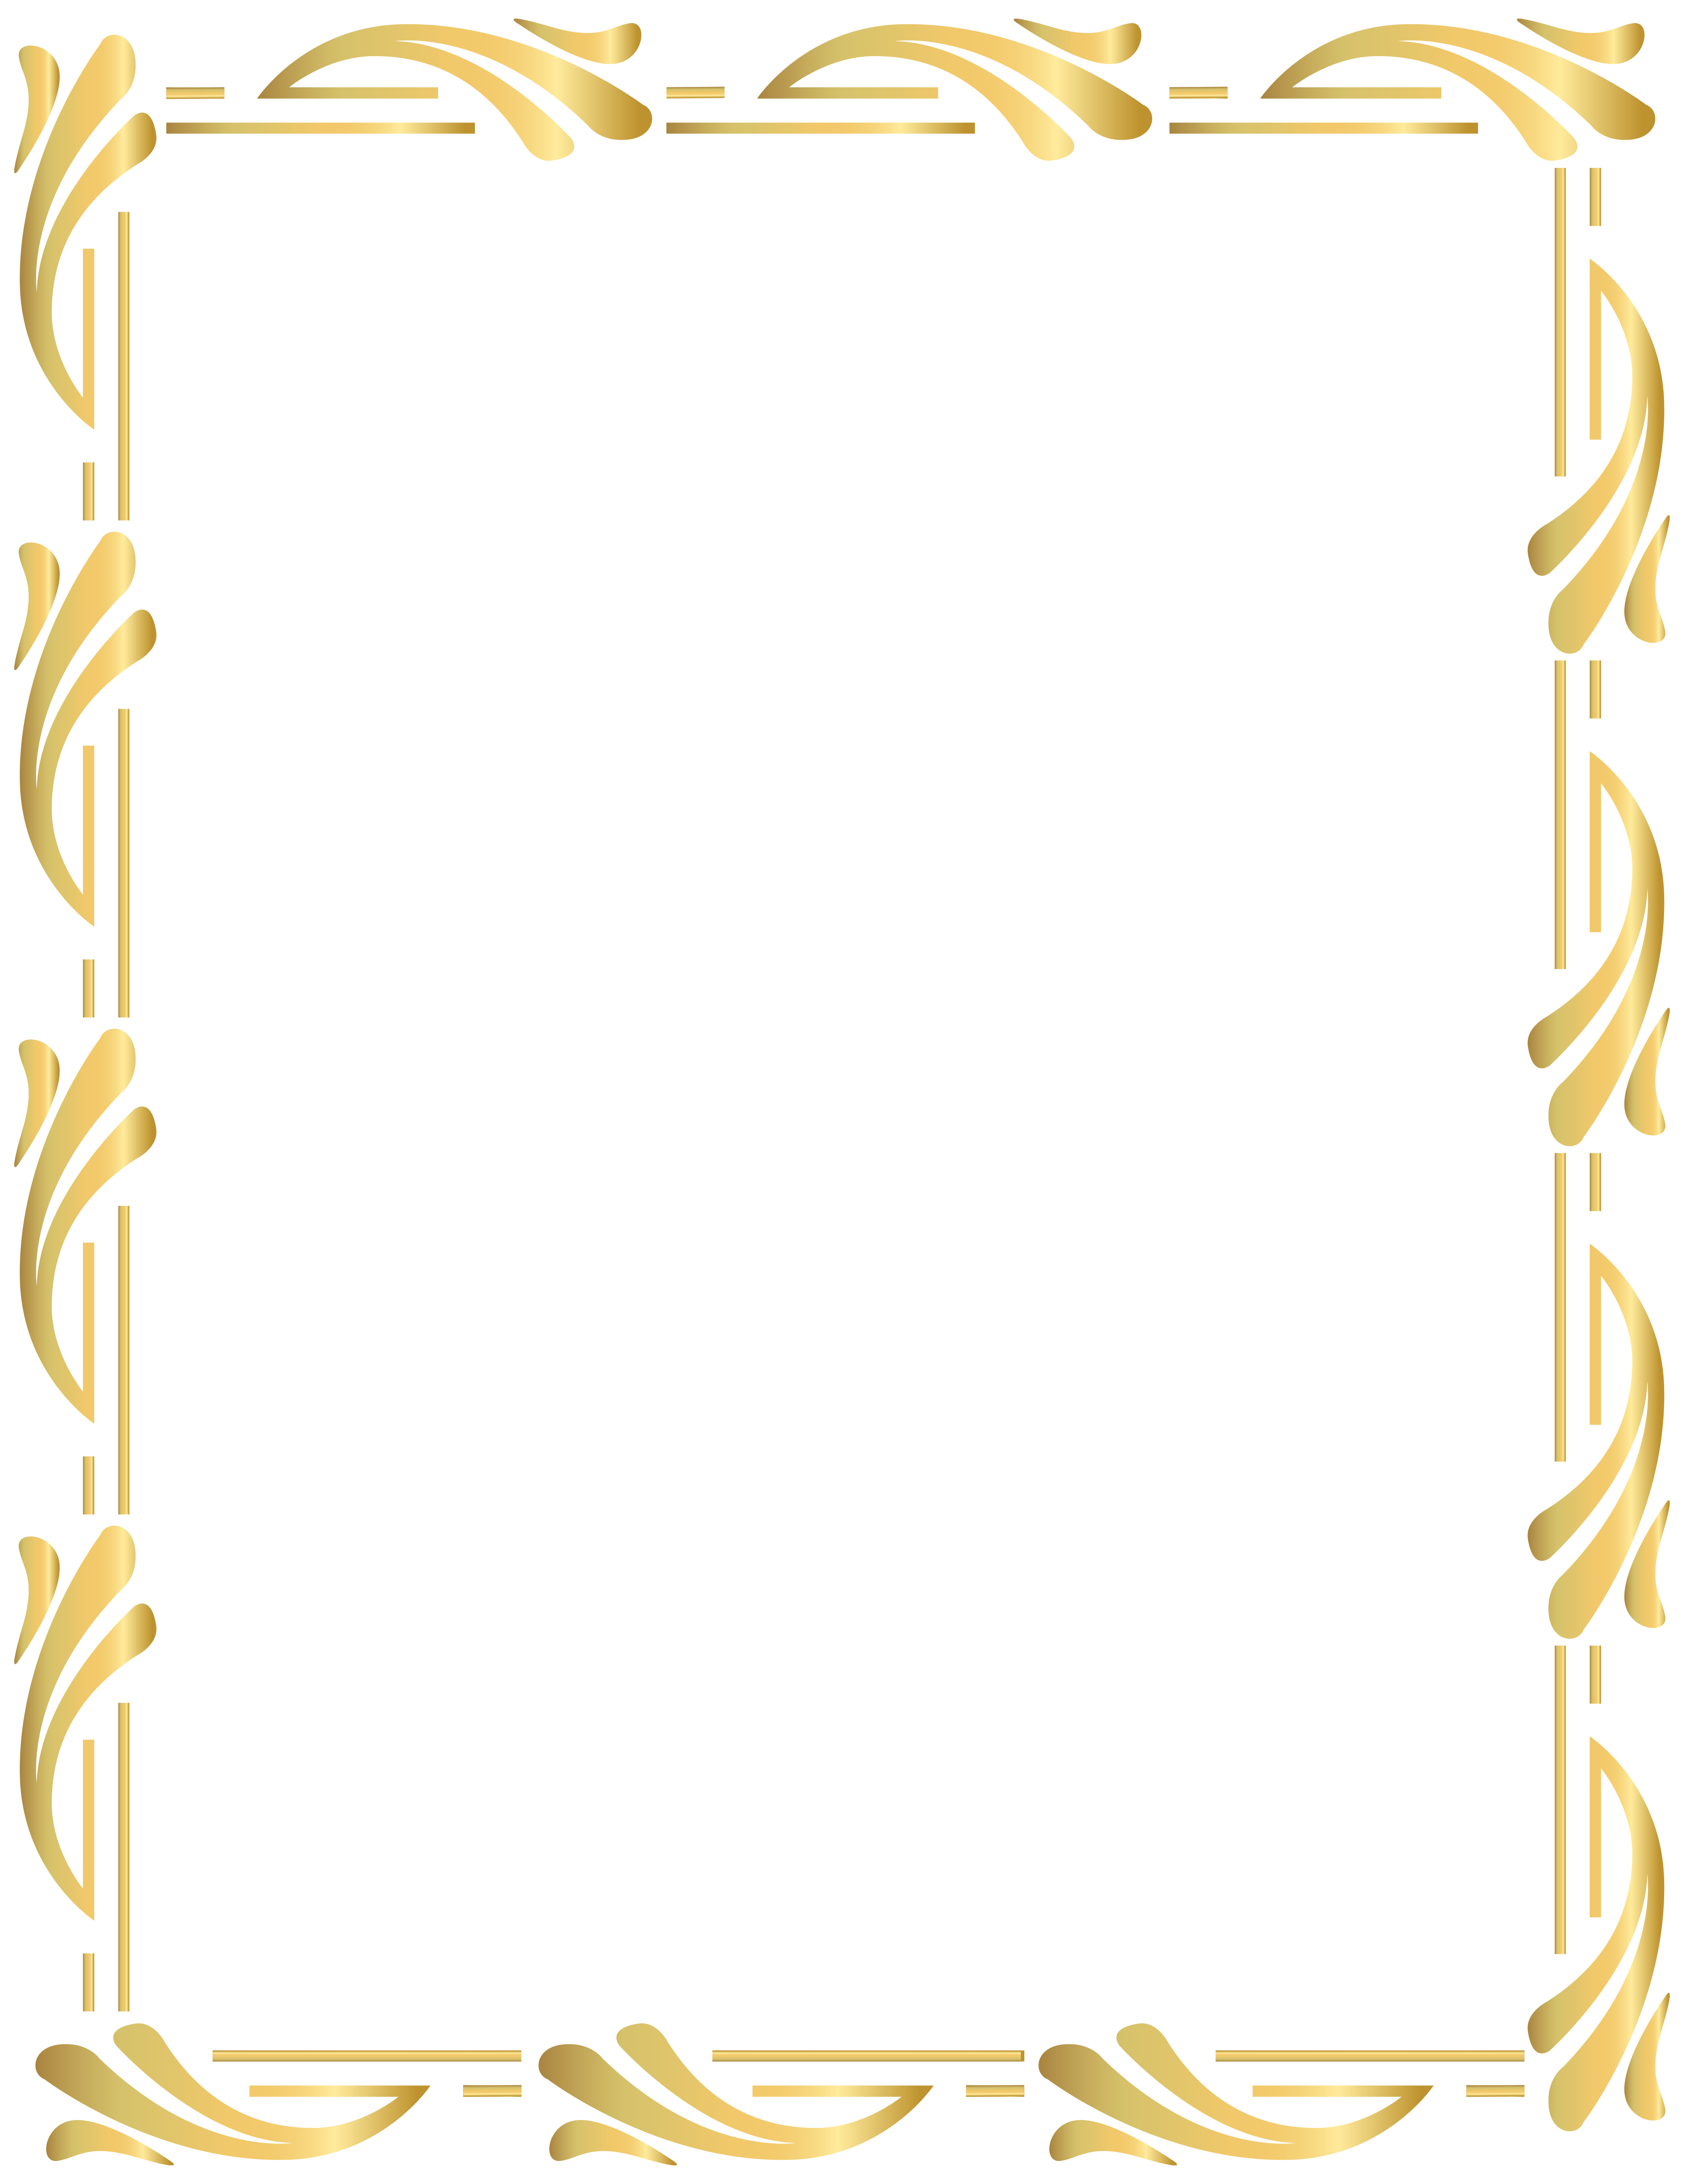 Border Frame Gold Clip Art Image | Gallery Yopriceville - High-Quality ...